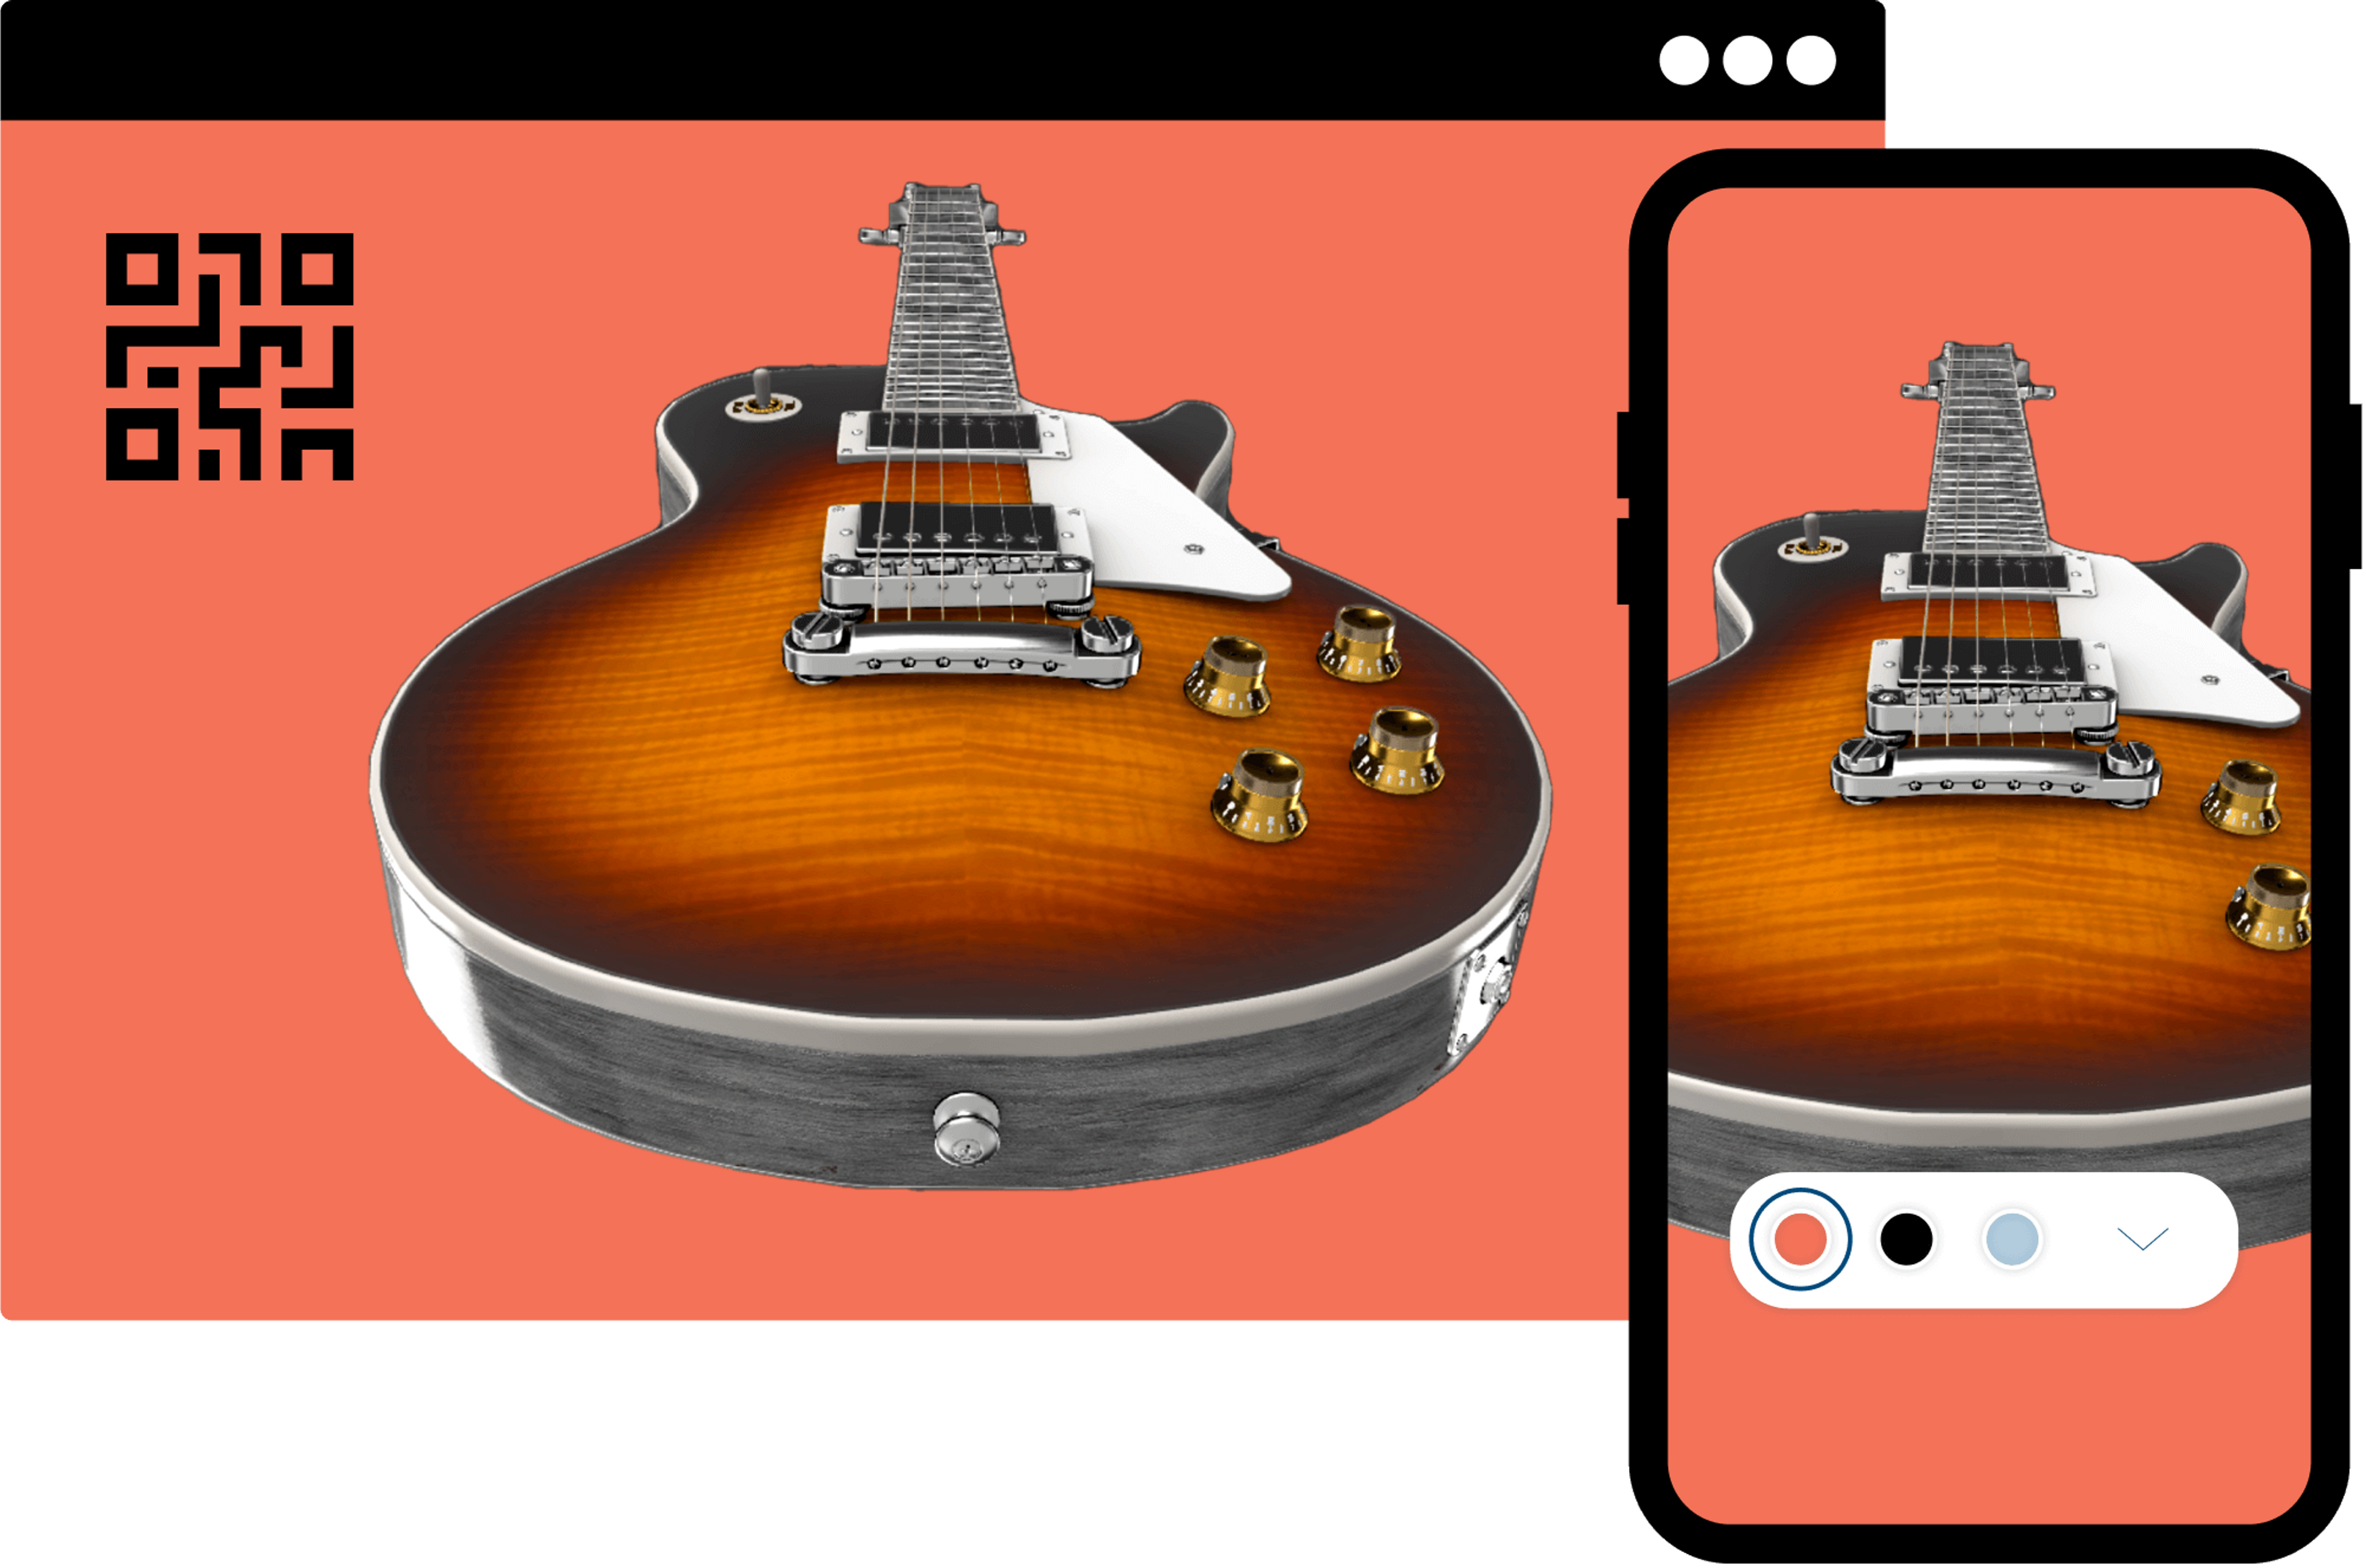 A QR code with a guitar render, overlaid on desktop and mobile